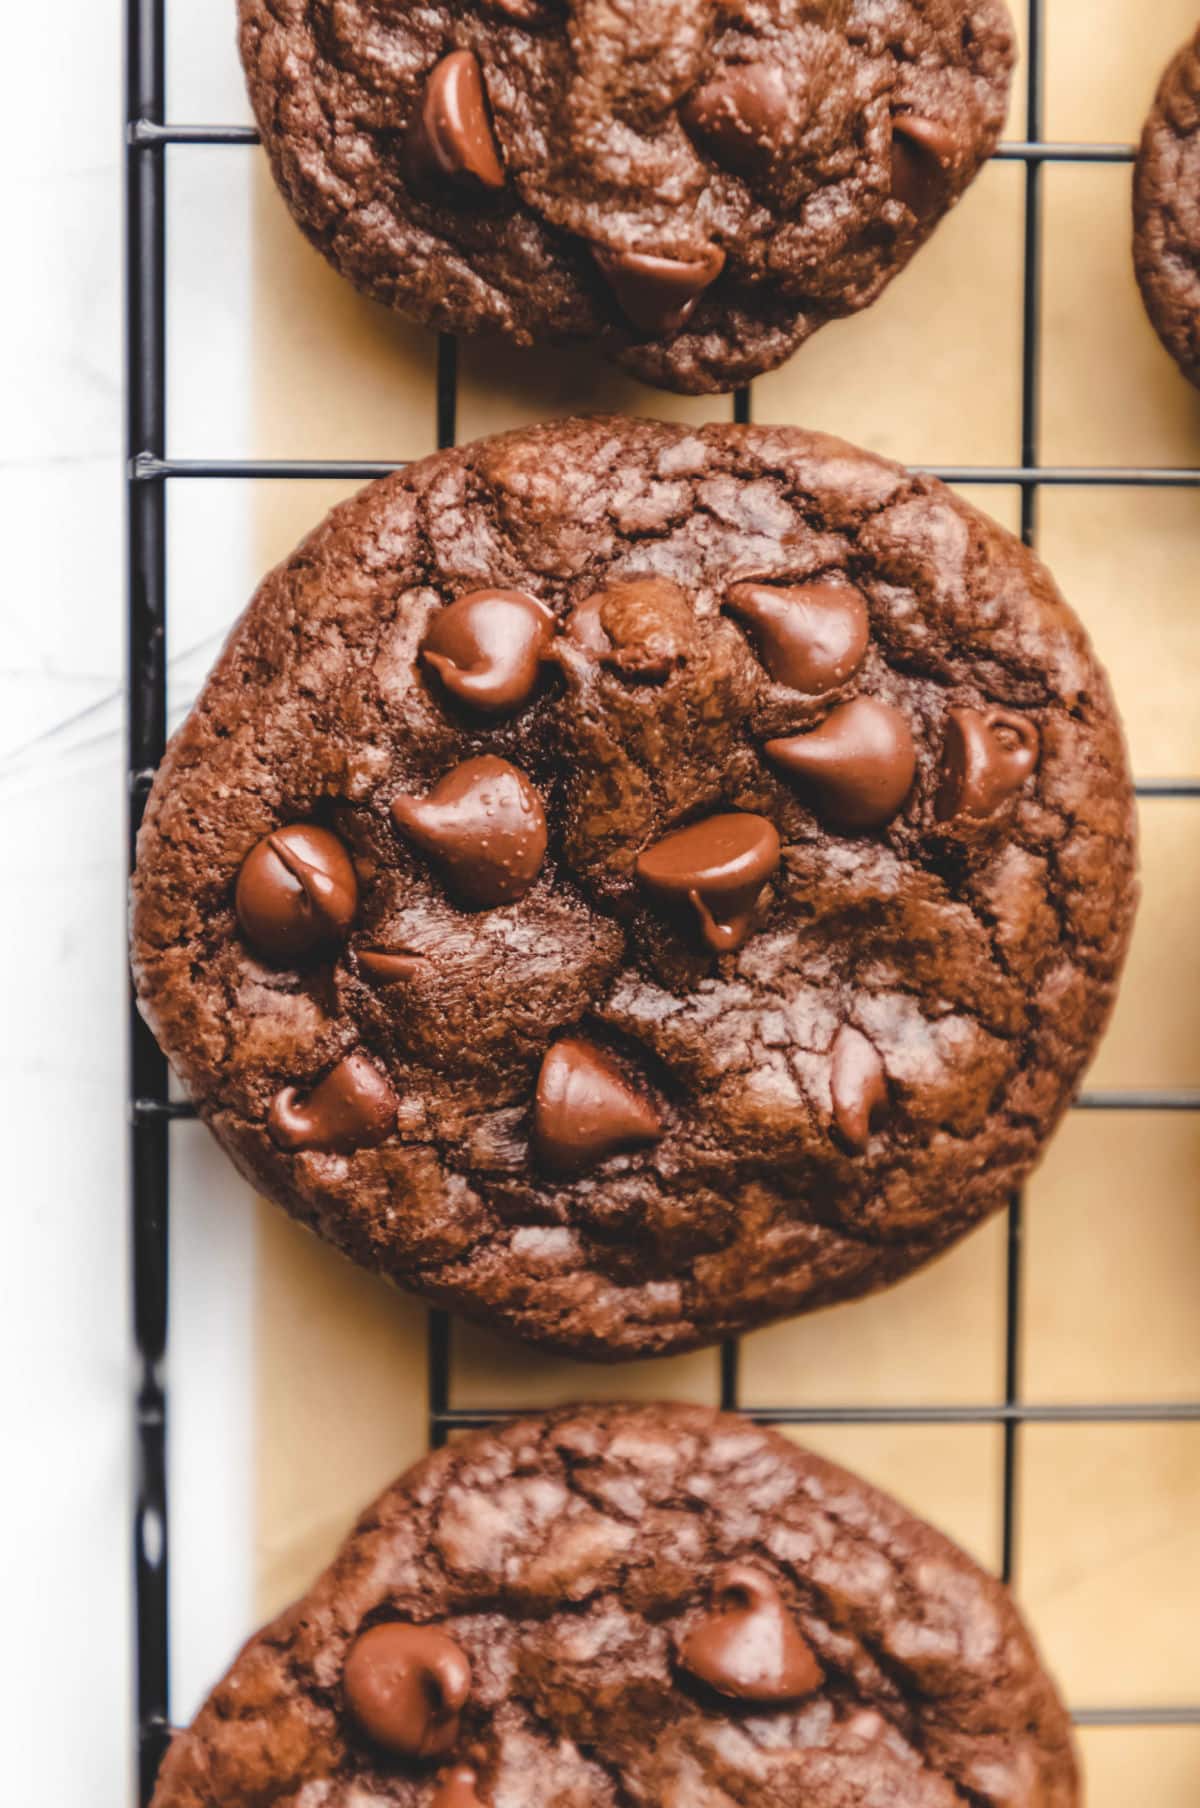 https://www.ihearteating.com/wp-content/uploads/2020/01/easy-chocolate-chocolate-chip-cookies-13-1200.jpg